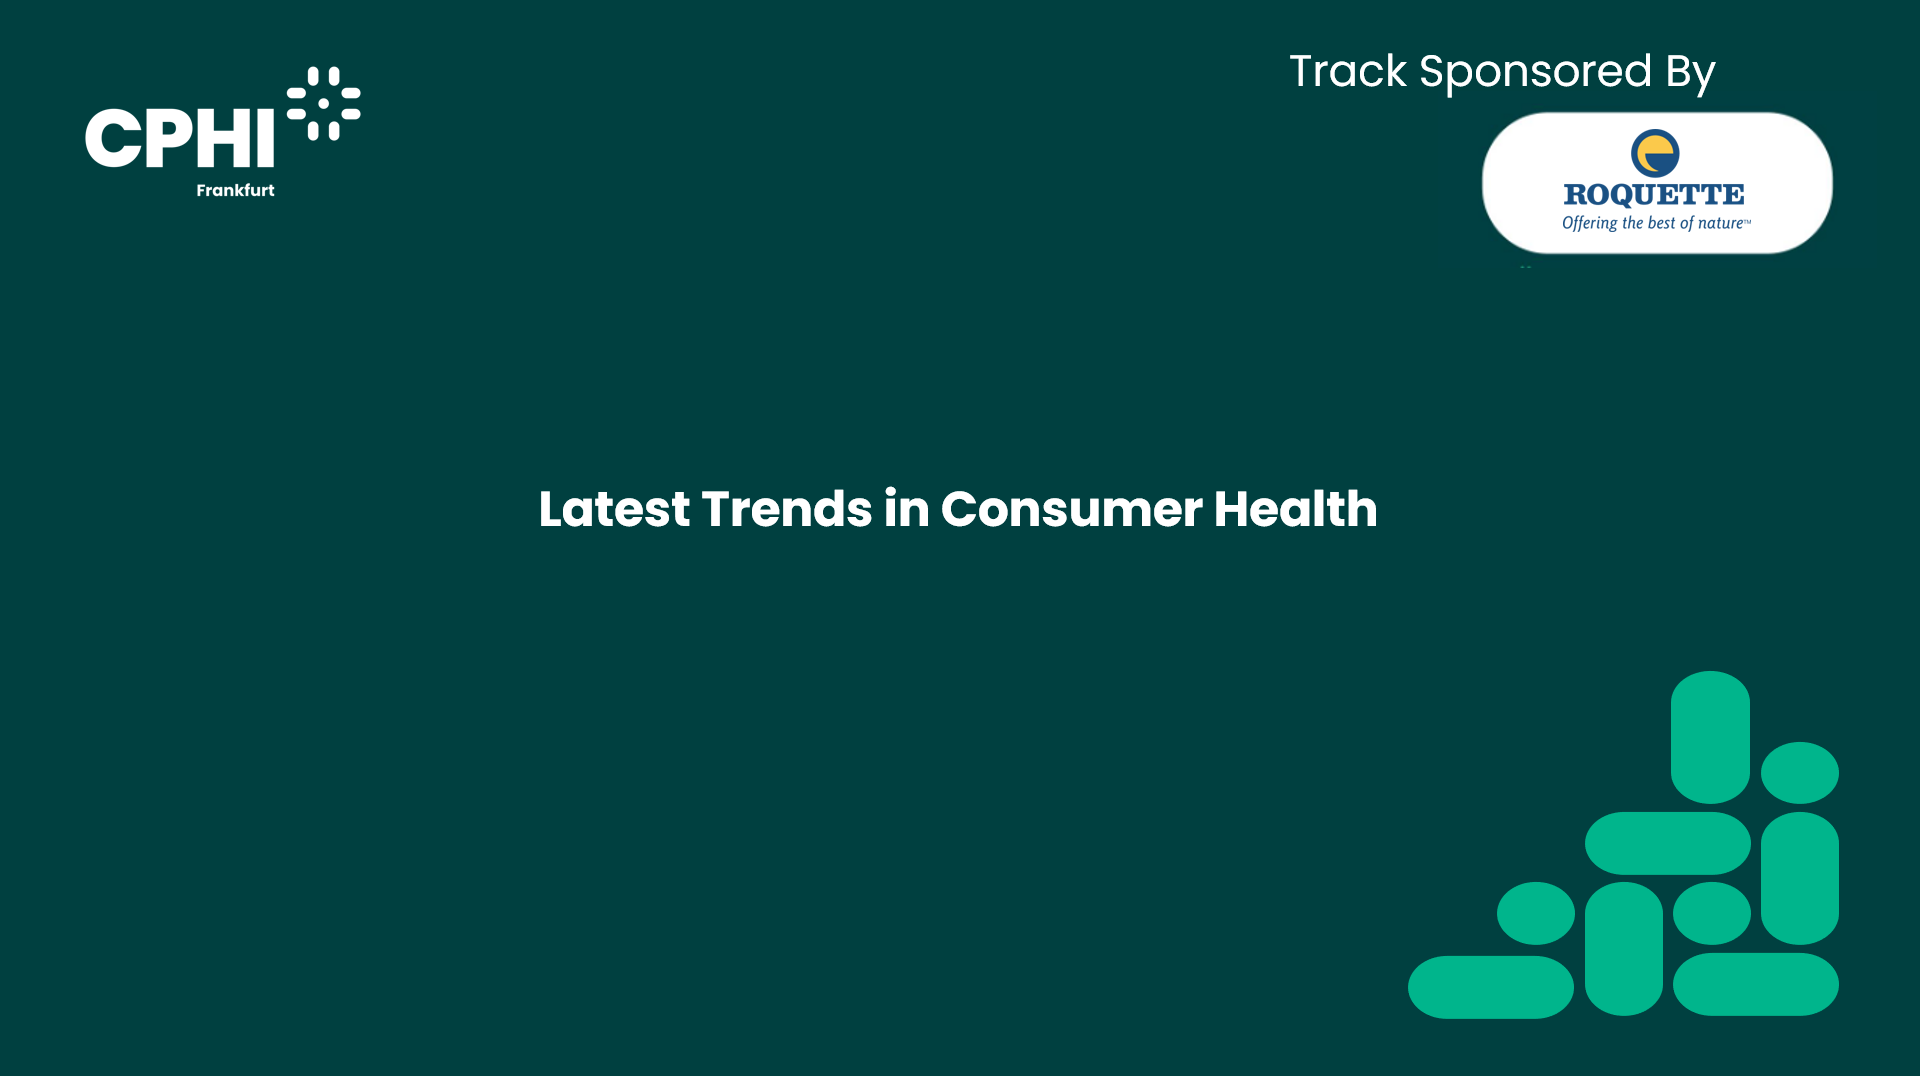 Latest Trends in Consumer Health